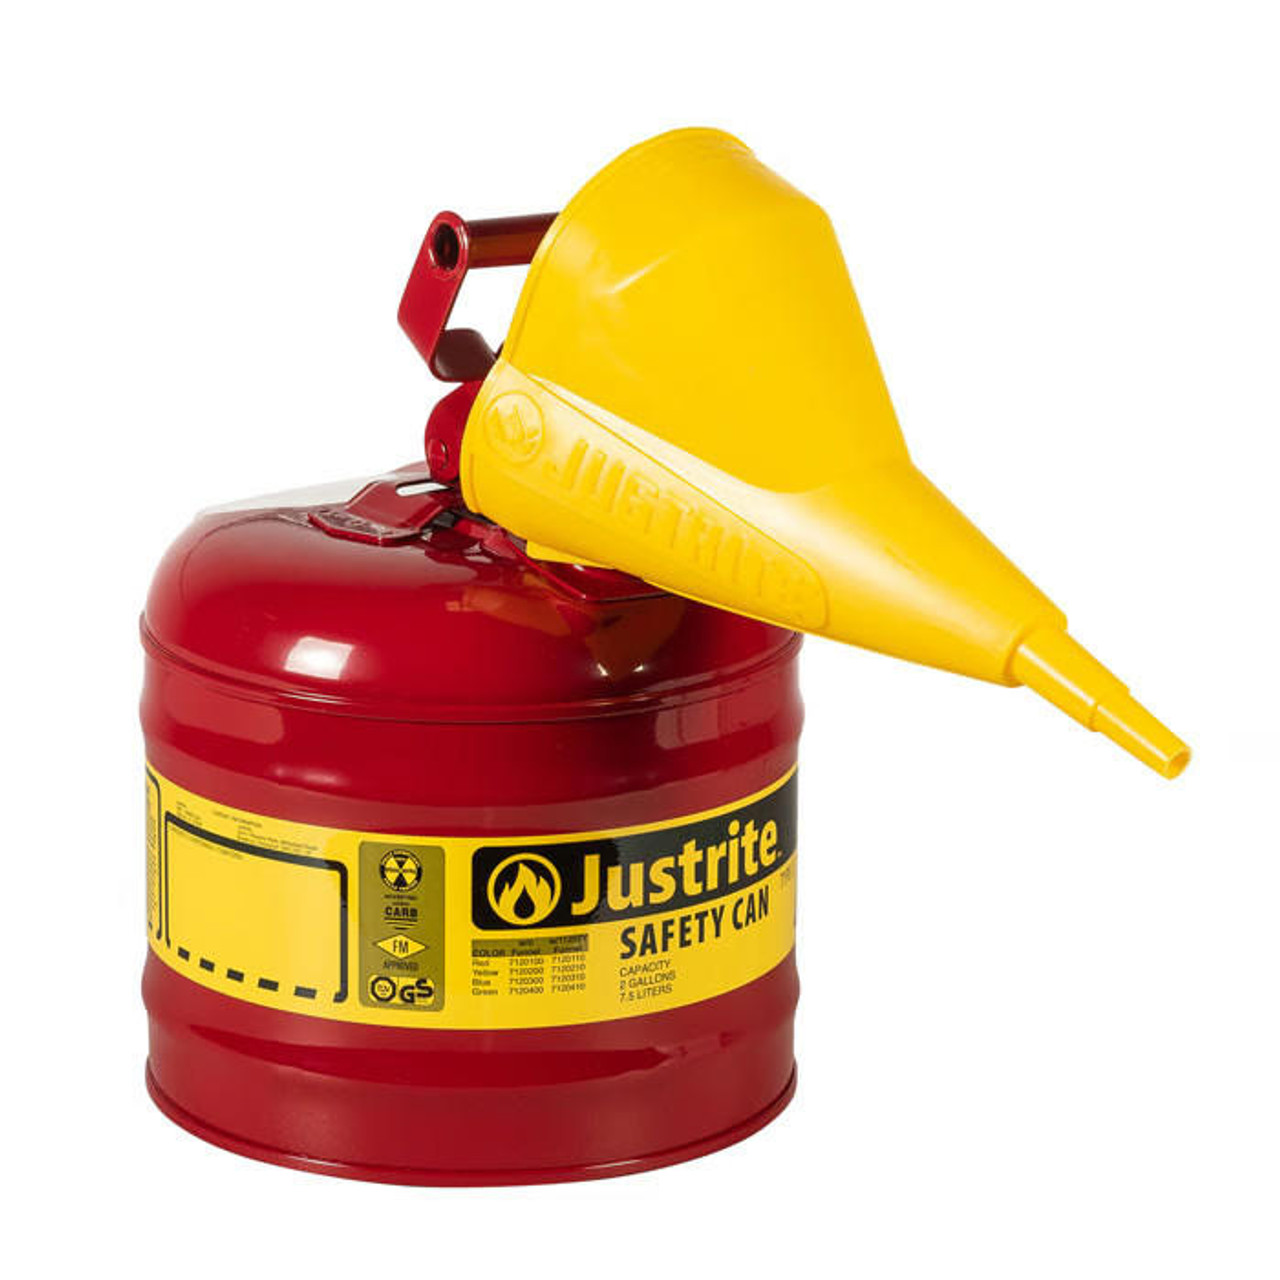 JUSTRITE 2 GAL TYPE I SAFETY CAN FUNNEL - Kamps Pallets